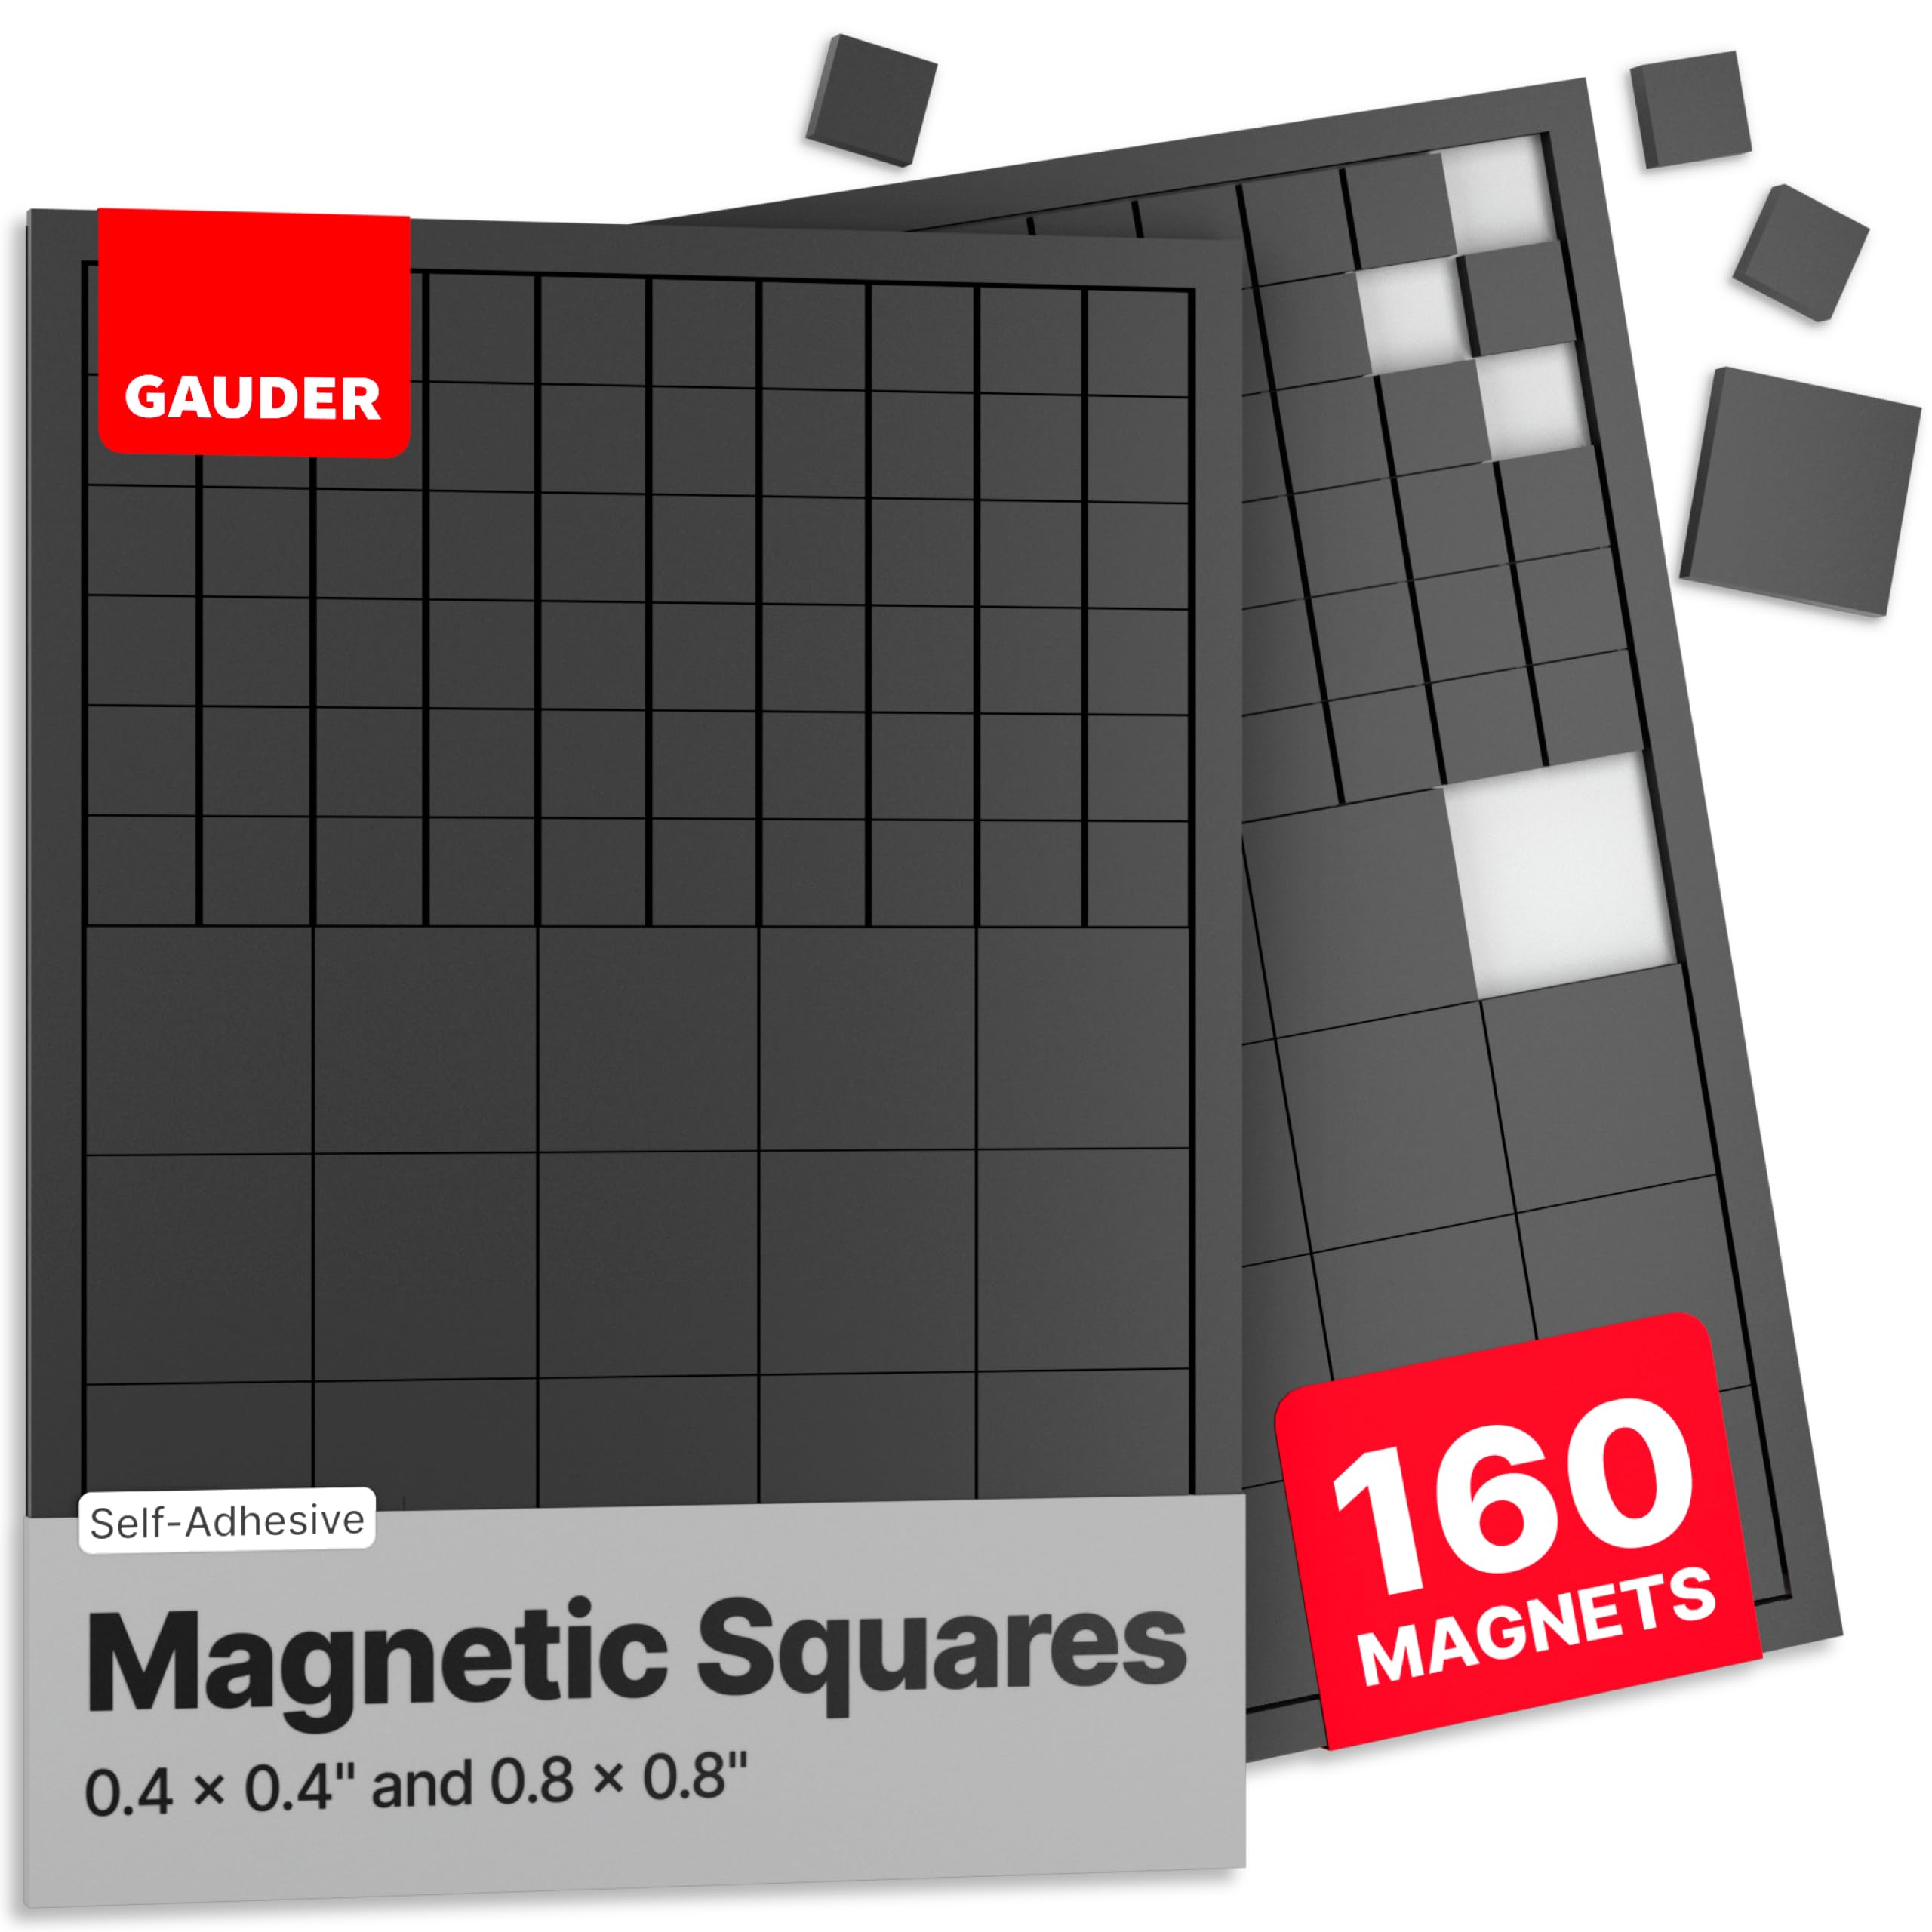 MP001 GAUDER Magnetic Squares Self Adhesive, Flexible Sticky Magnets